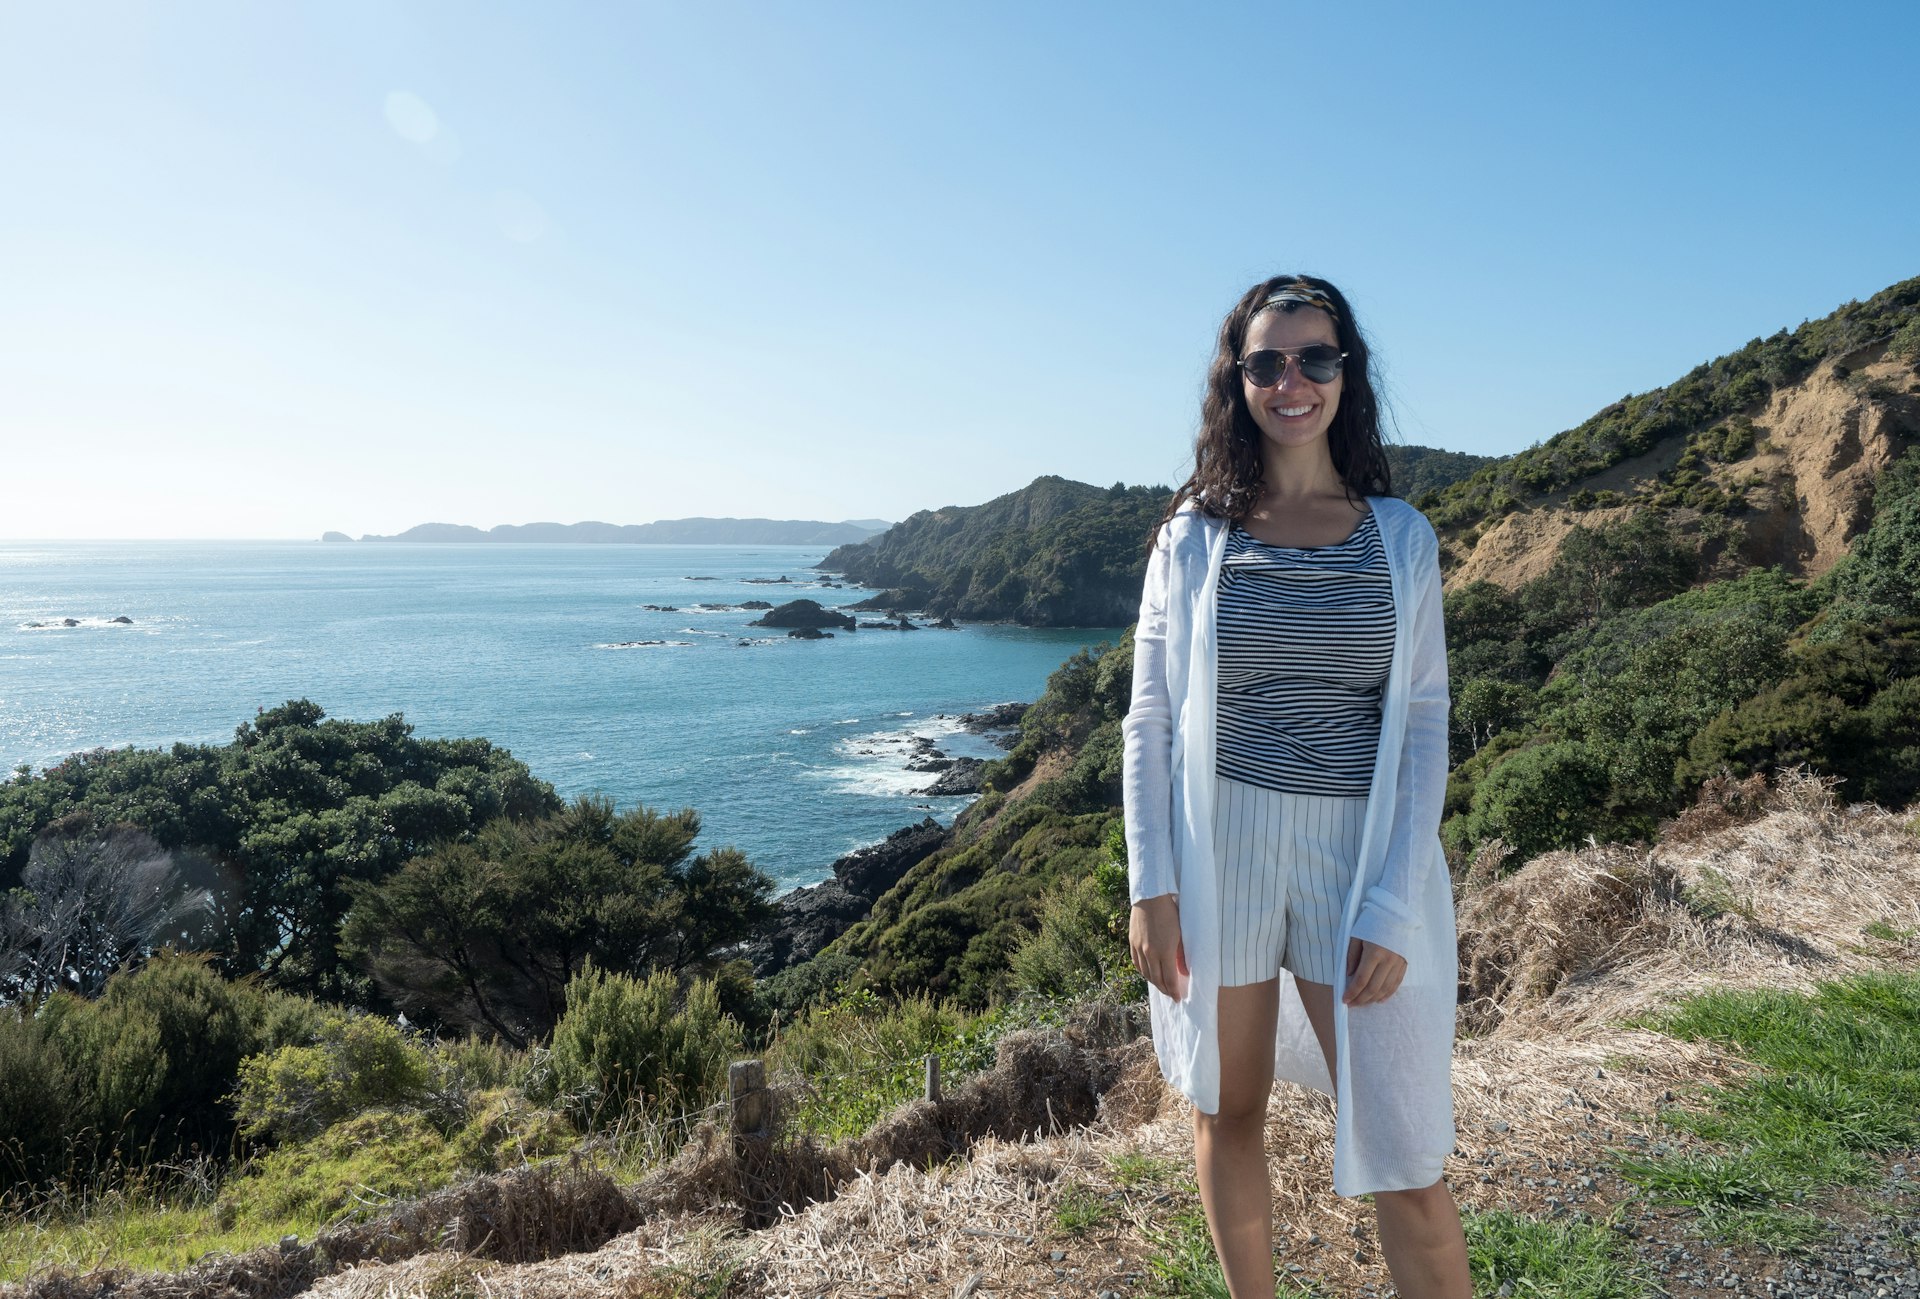 Caterina stands cliffside in Russell, North Island, New Zealand